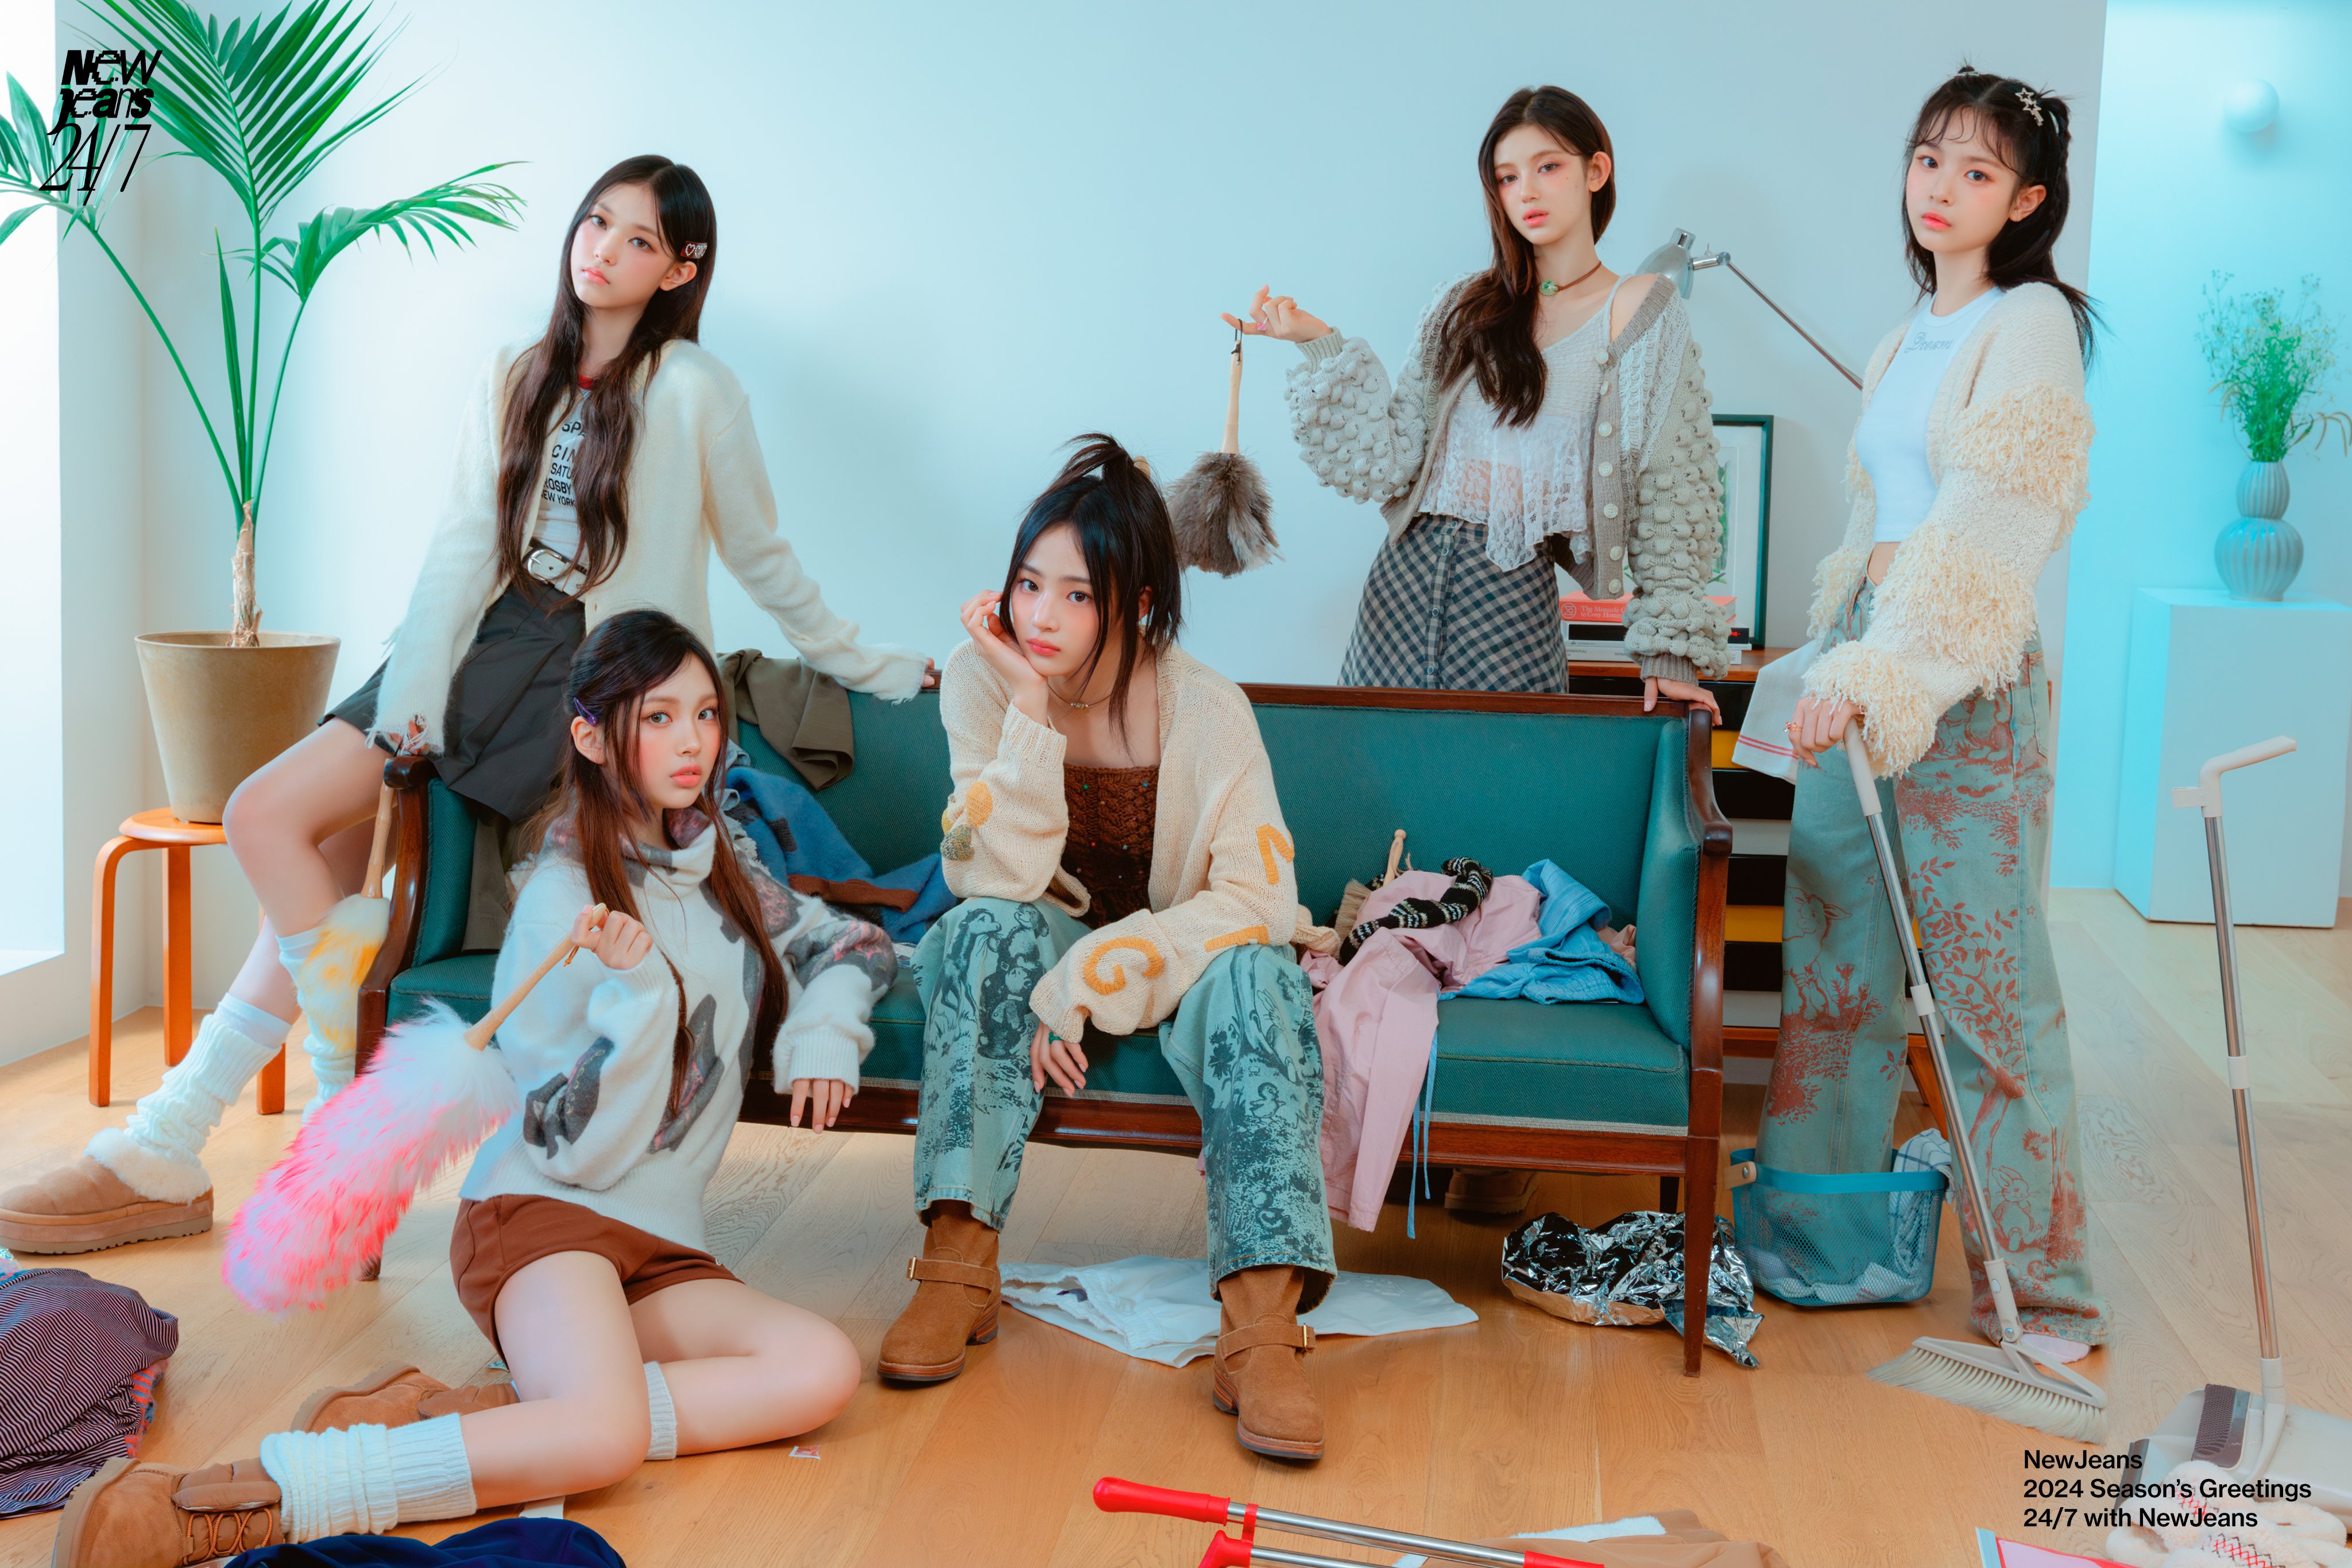 NewJeans' 'Ditto' is now the girl group song with most Perfect All